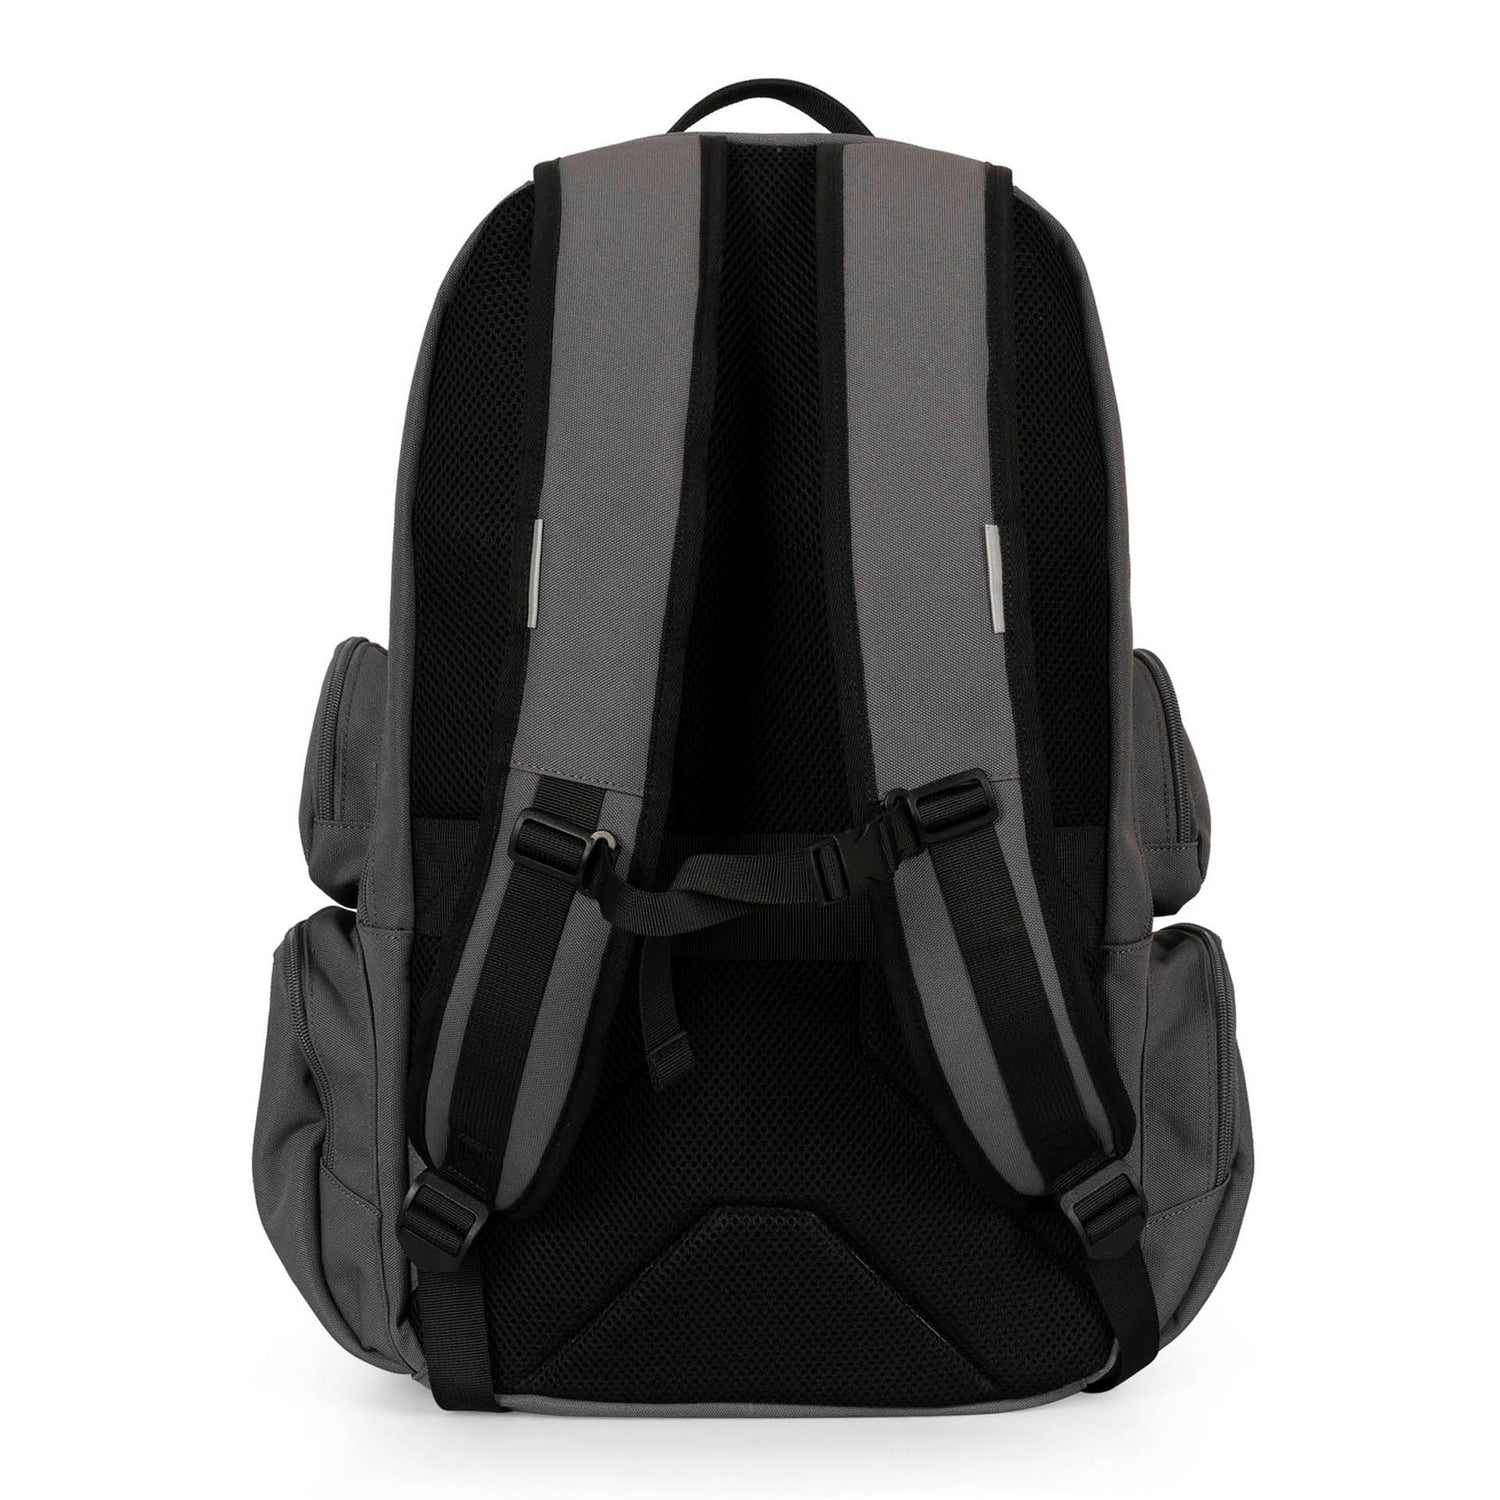 Back side view of a grey laptop backpack called Cartier 3.0 designed by Tracker on a white background, showcasing 2 shoulder straps, 4 front pockets, a top handle, and a padded back panel.